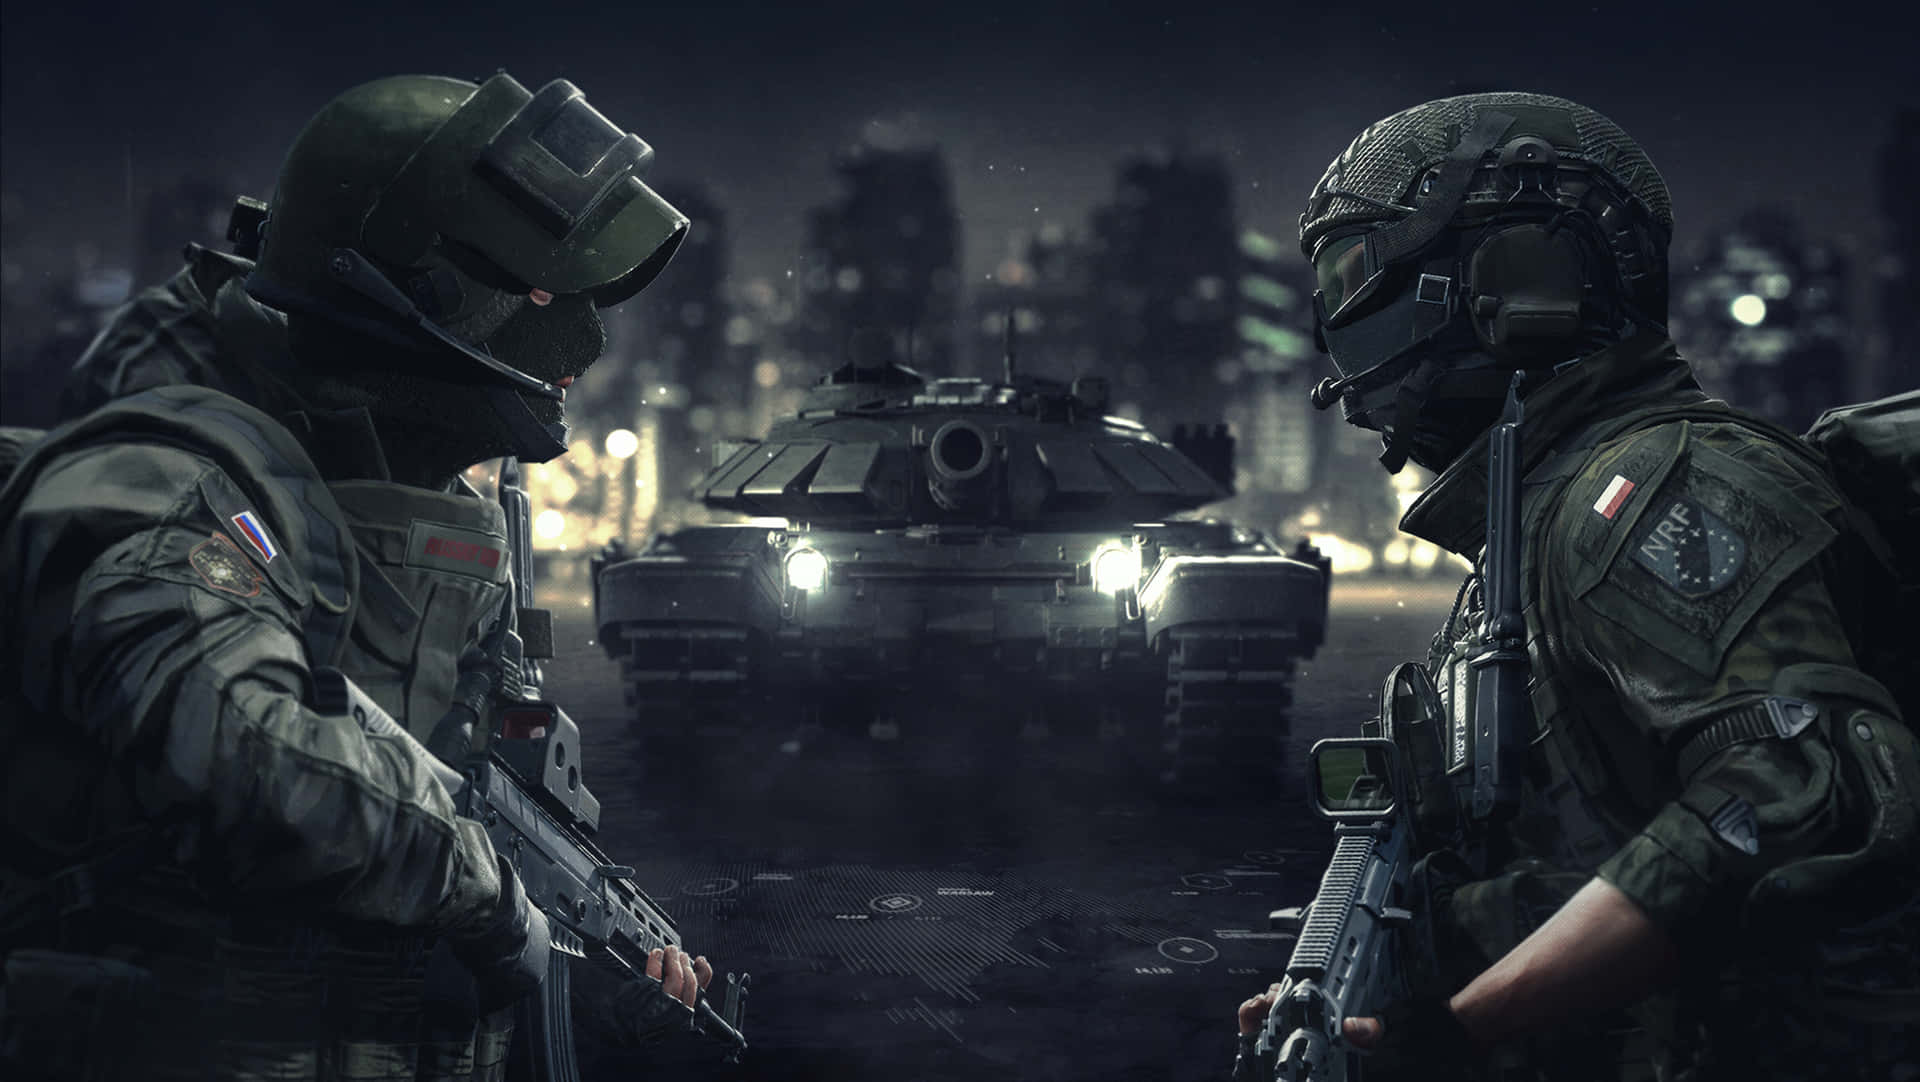 Soldiers_and_ Armored_ Vehicle_ Night_ Patrol.jpg Wallpaper